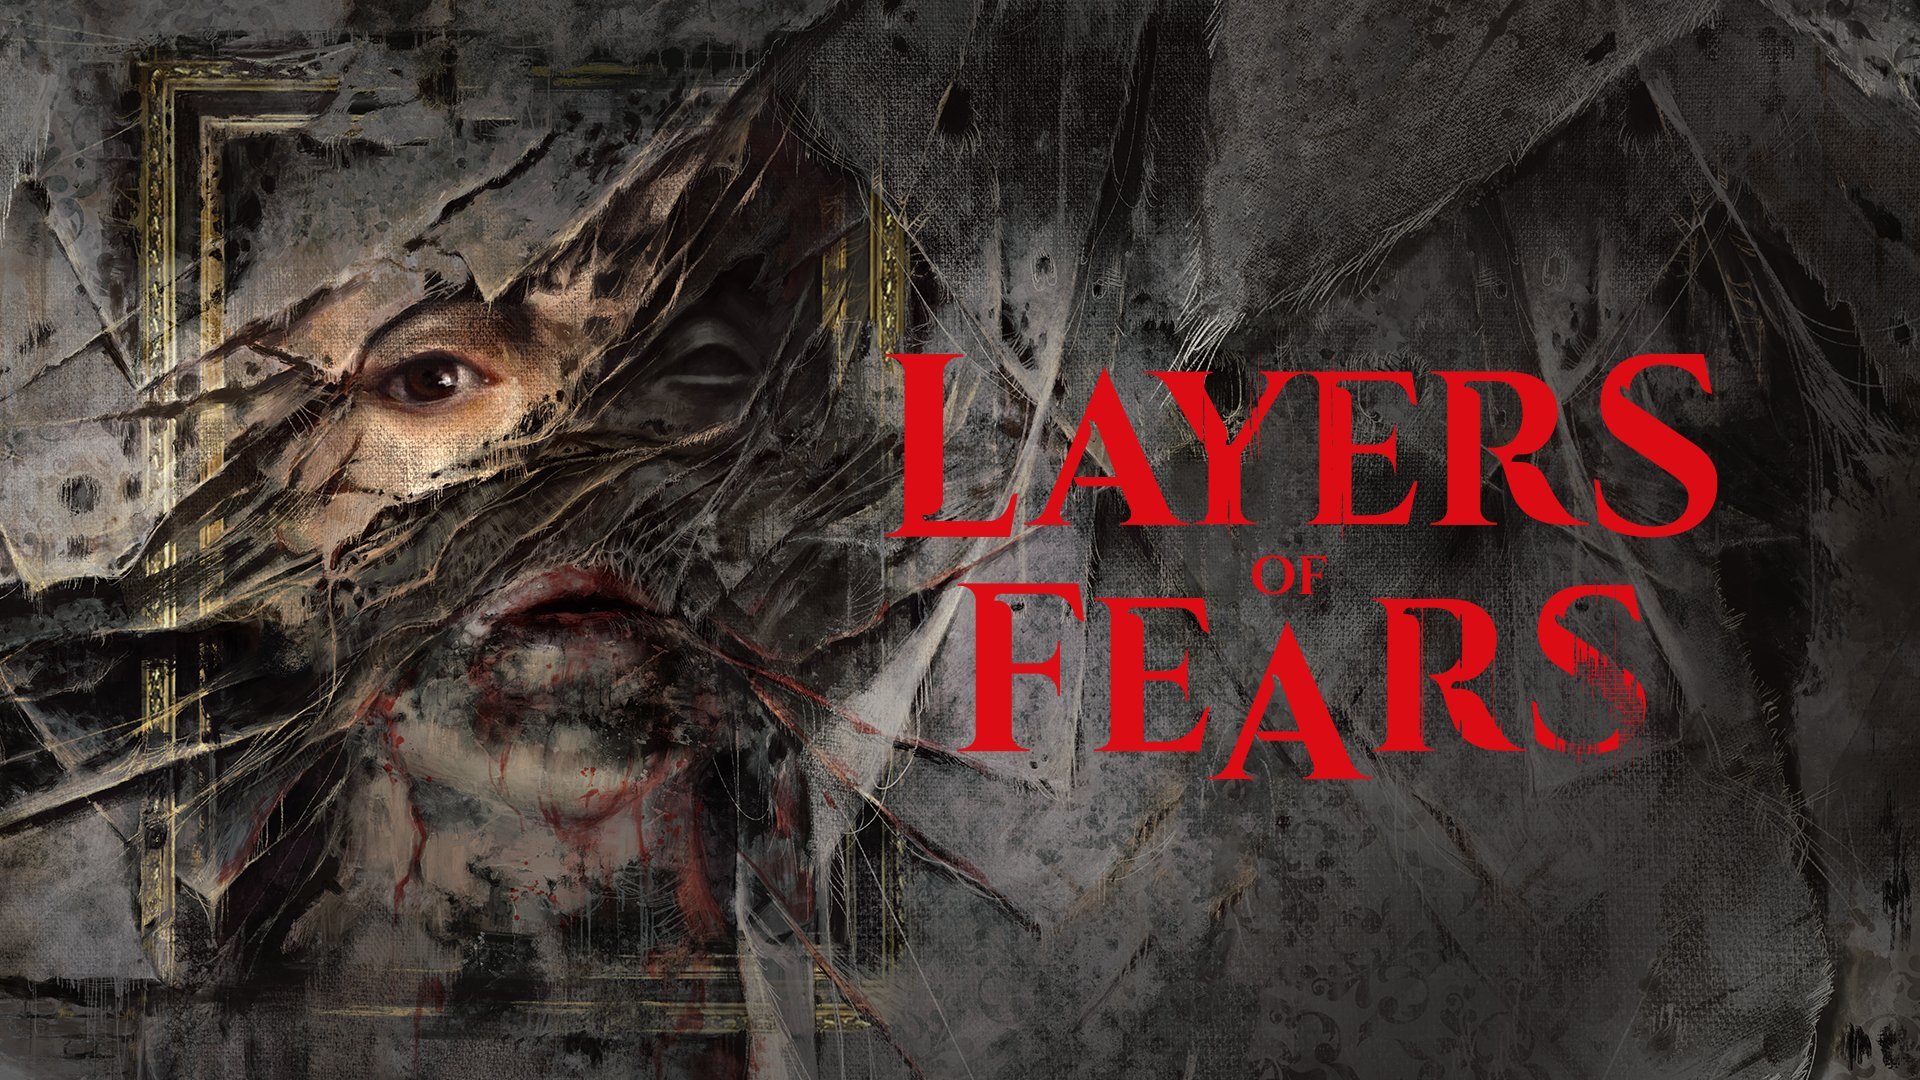 HD wallpaper: video games, layers of fear